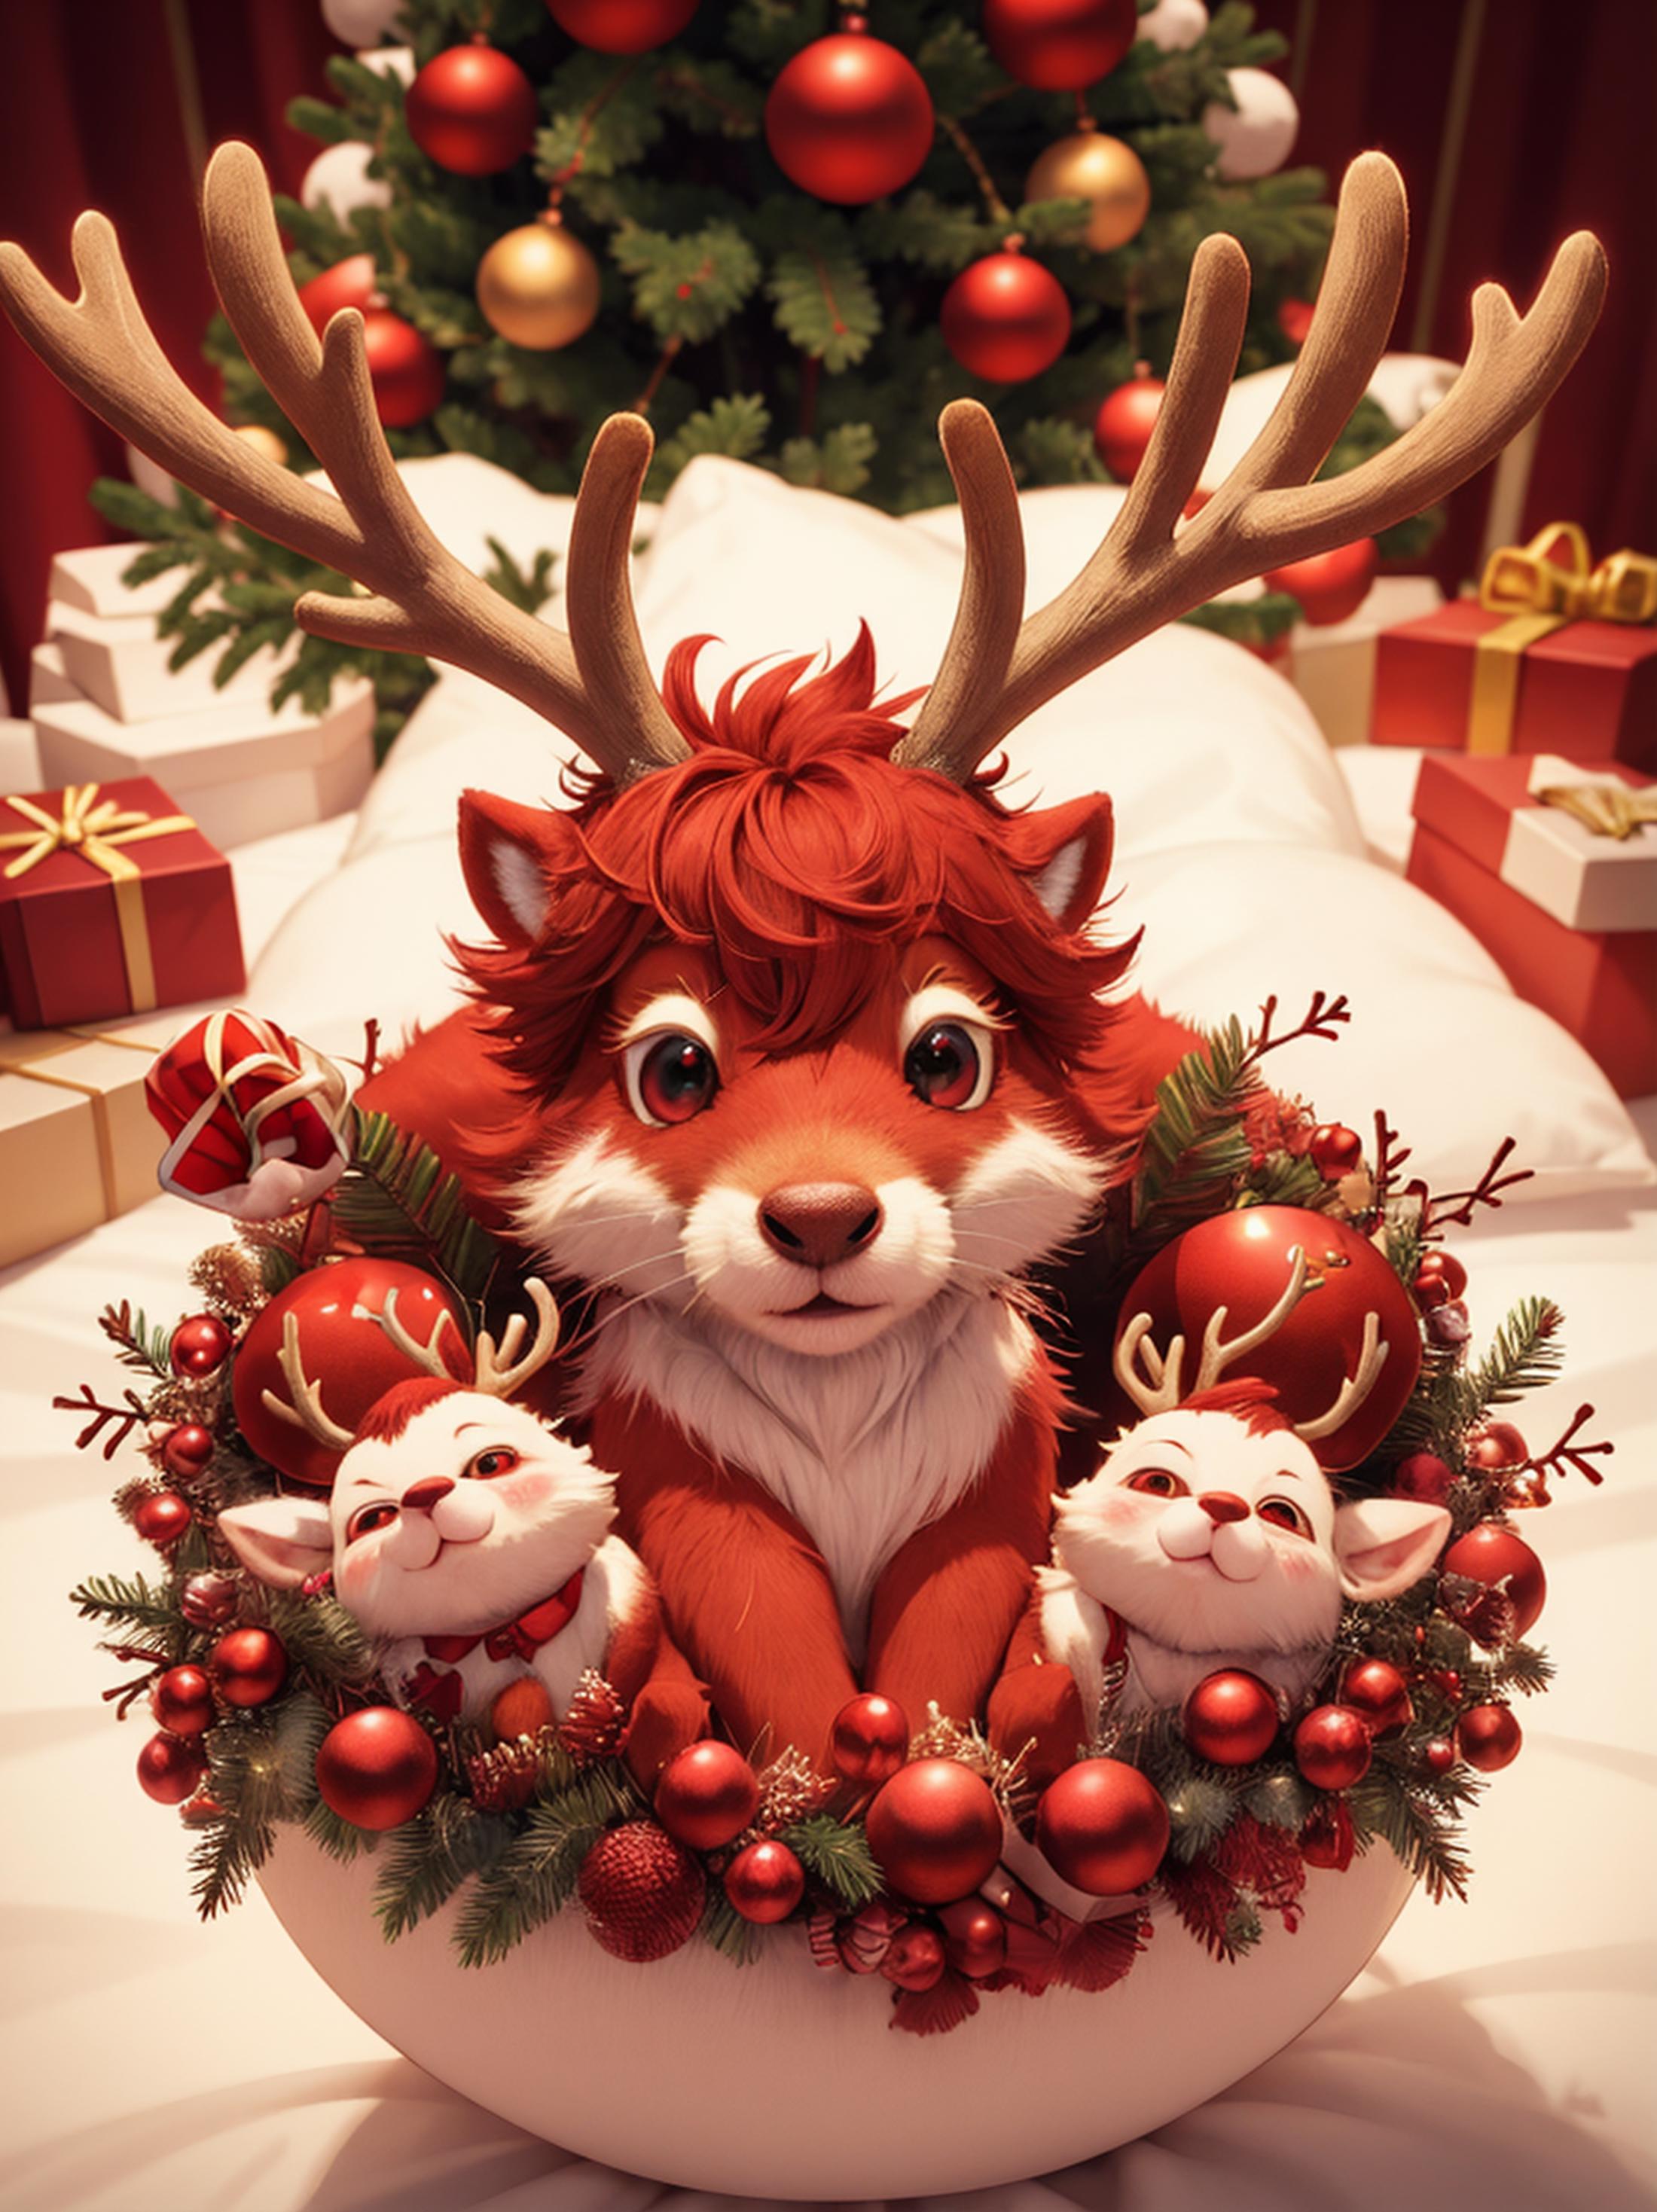 A cute cartoon image of a dog with antlers, sitting in a group with two kittens, all surrounded by Christmas presents.